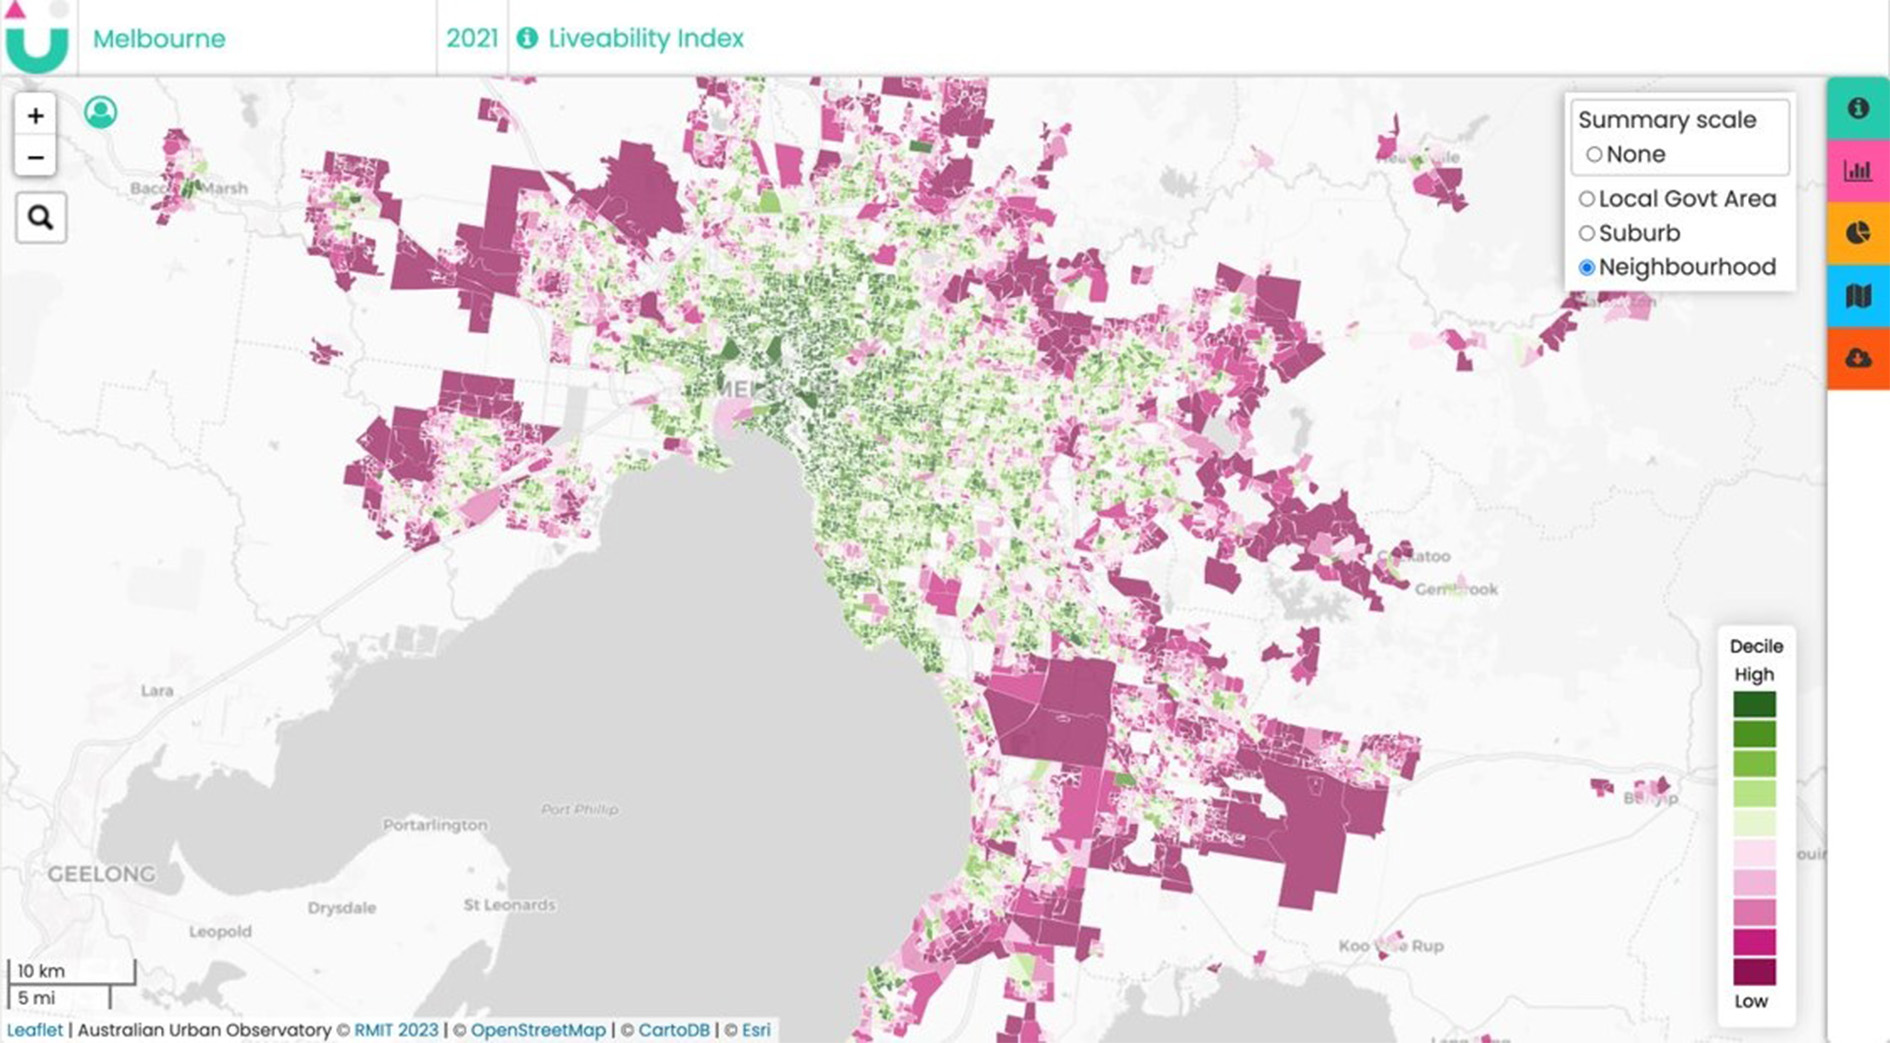 Map of Melbourne neighbourhoods colour coded in greens and pinks which determine their liveability